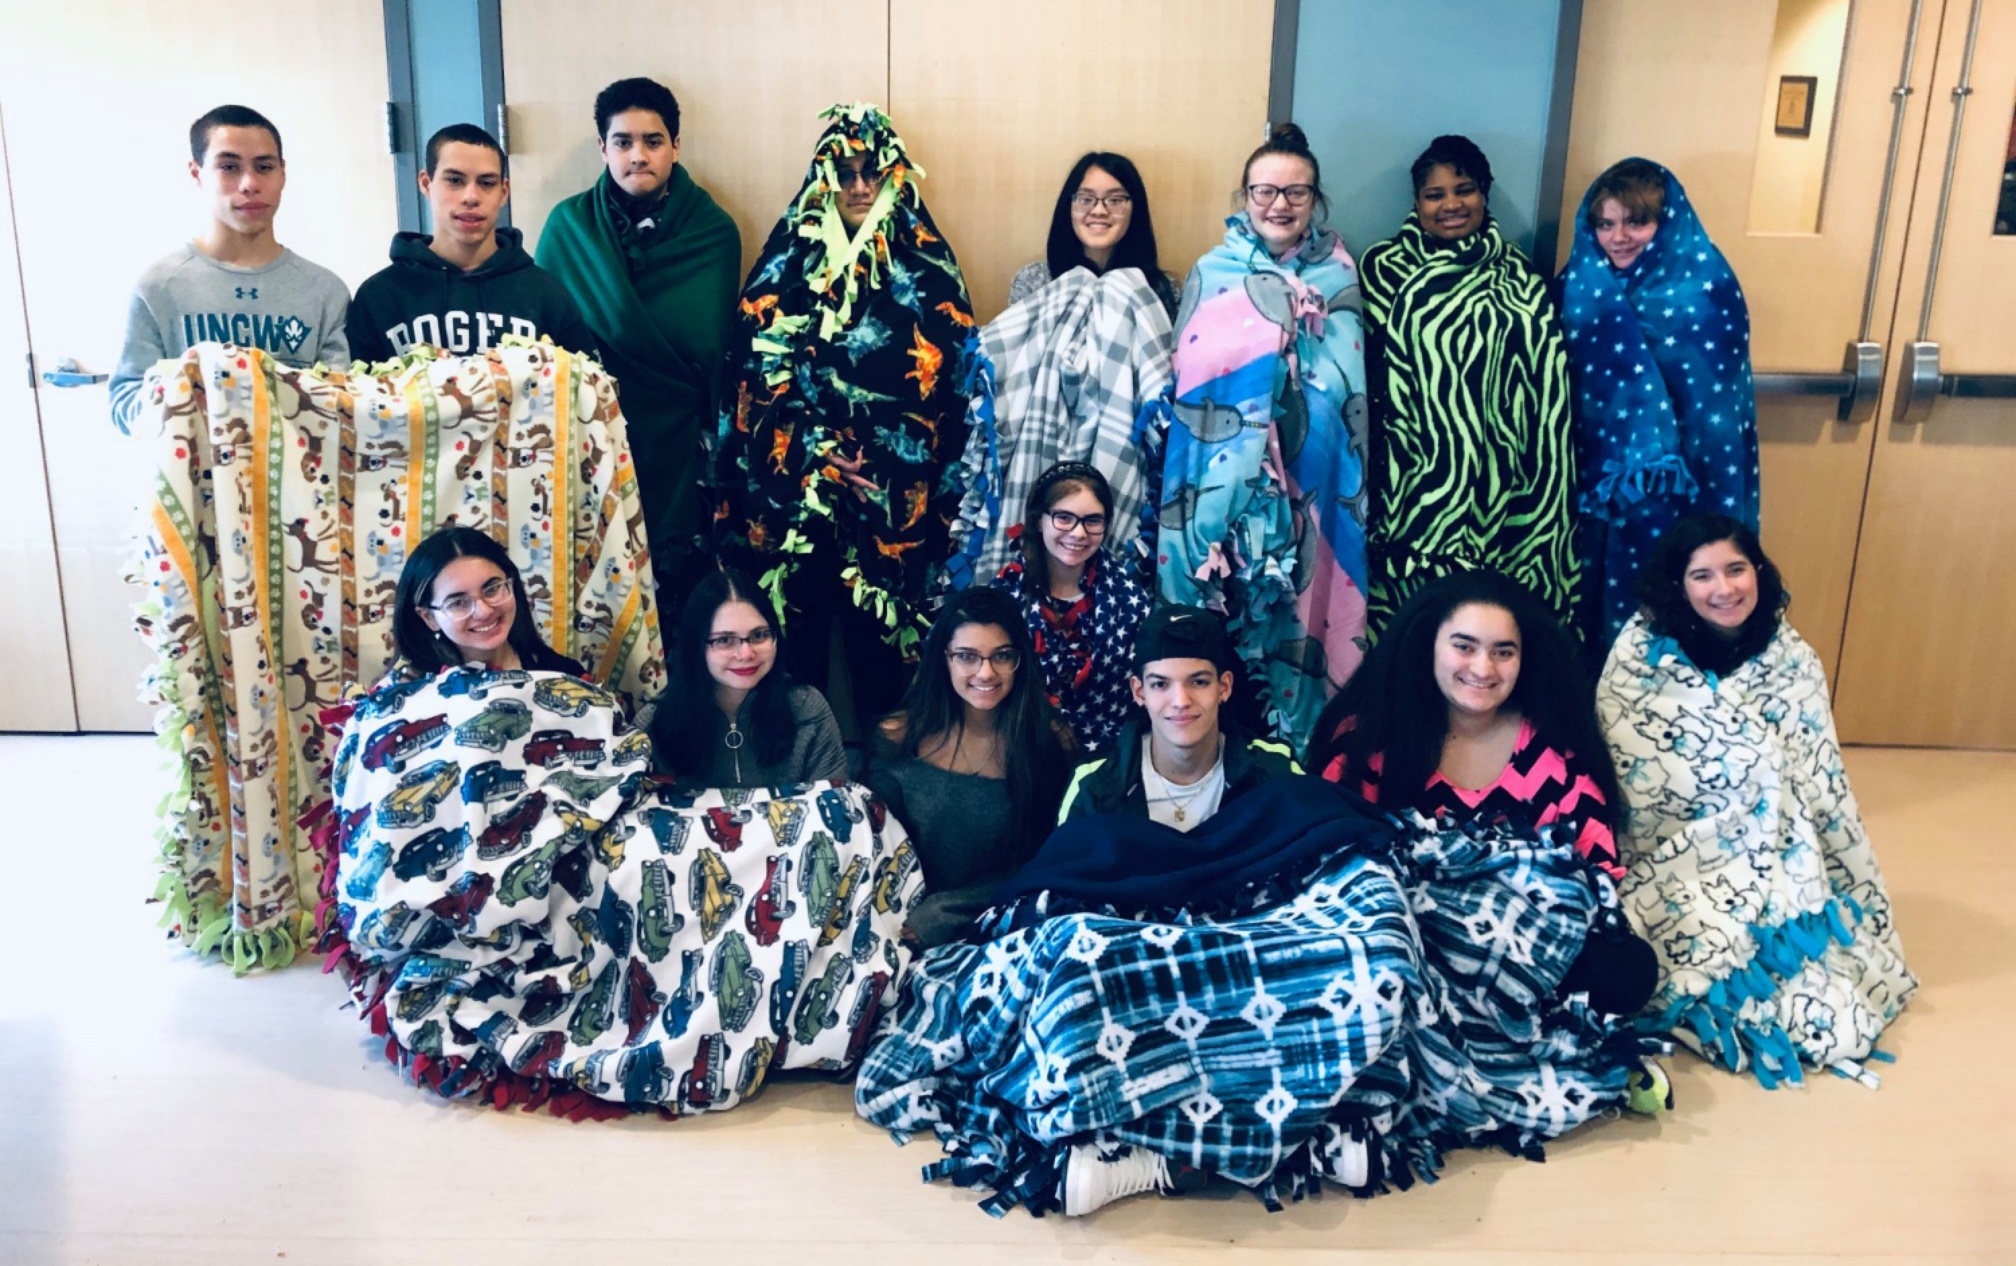 Our teen volunteers helped us make so many blankets to help keep someone warm this past winter!